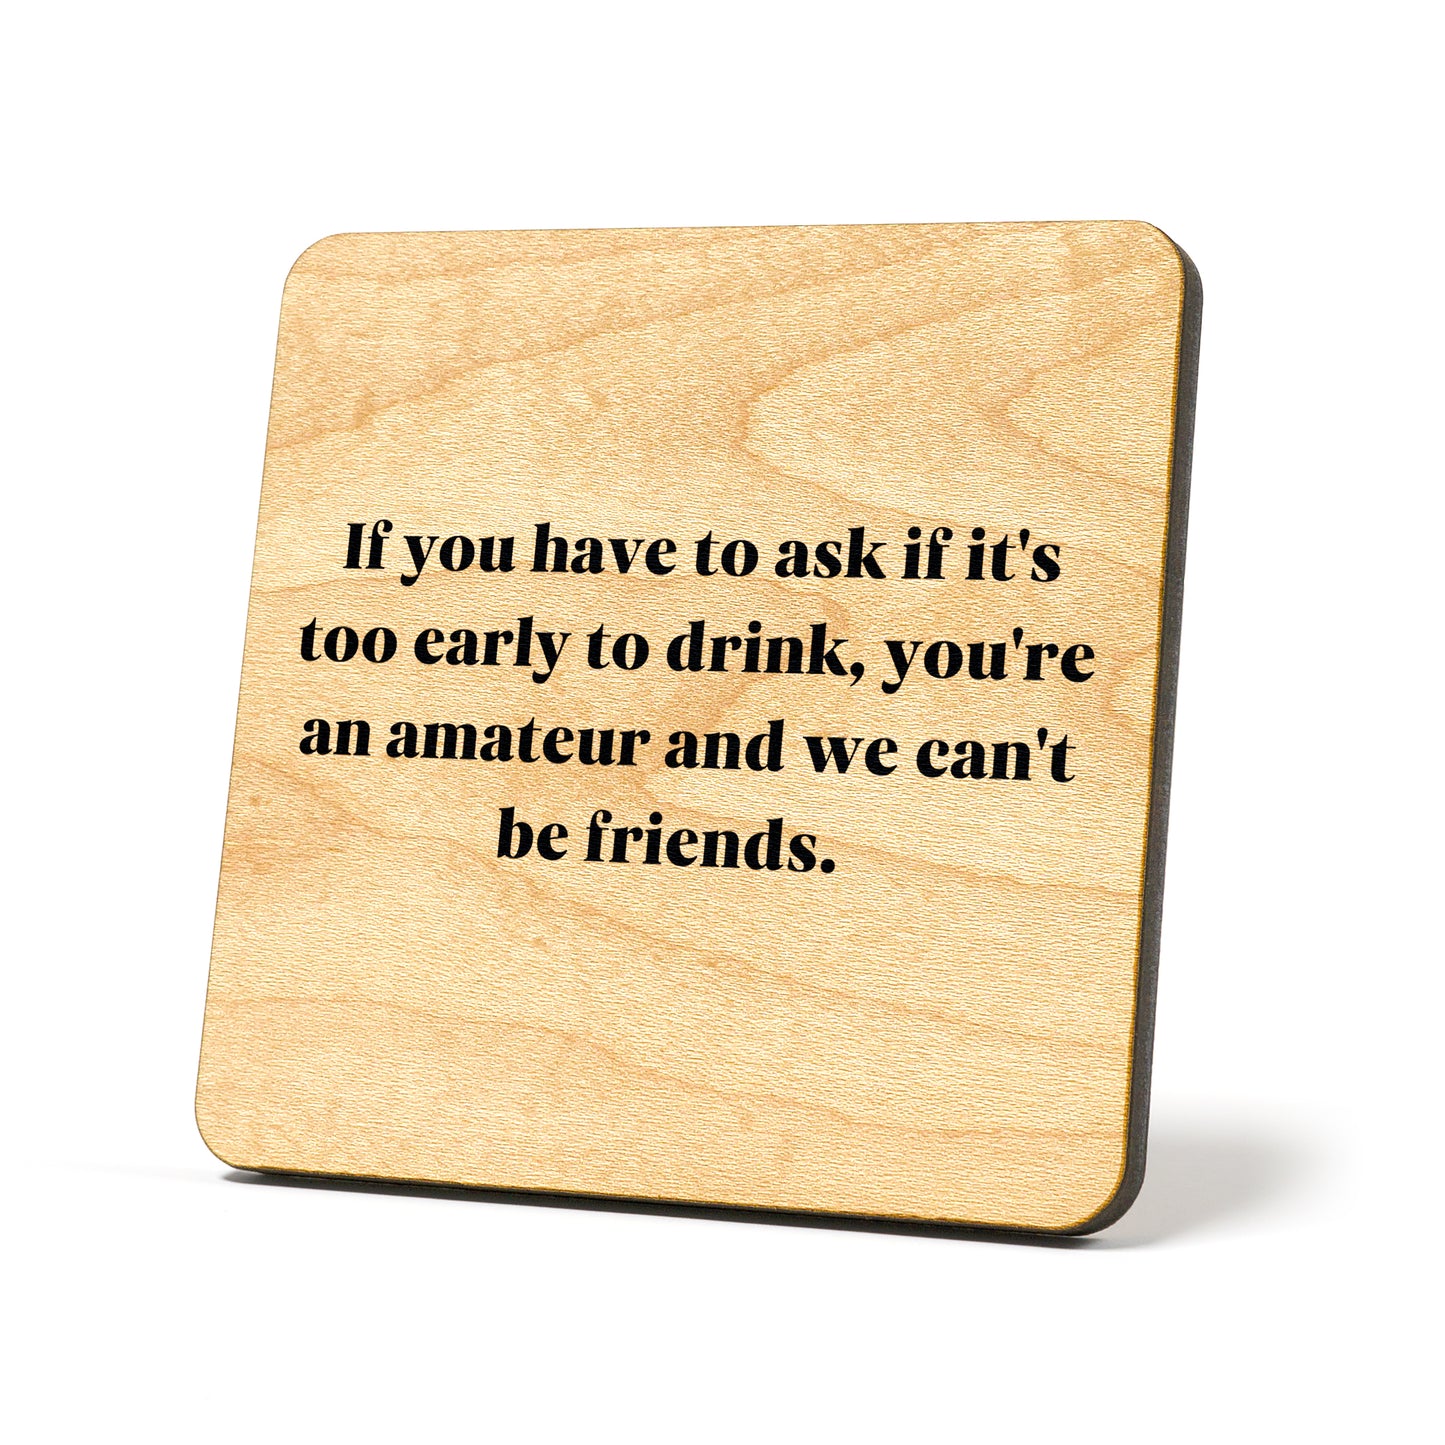 Have to ask if it's too early Quote Coaster